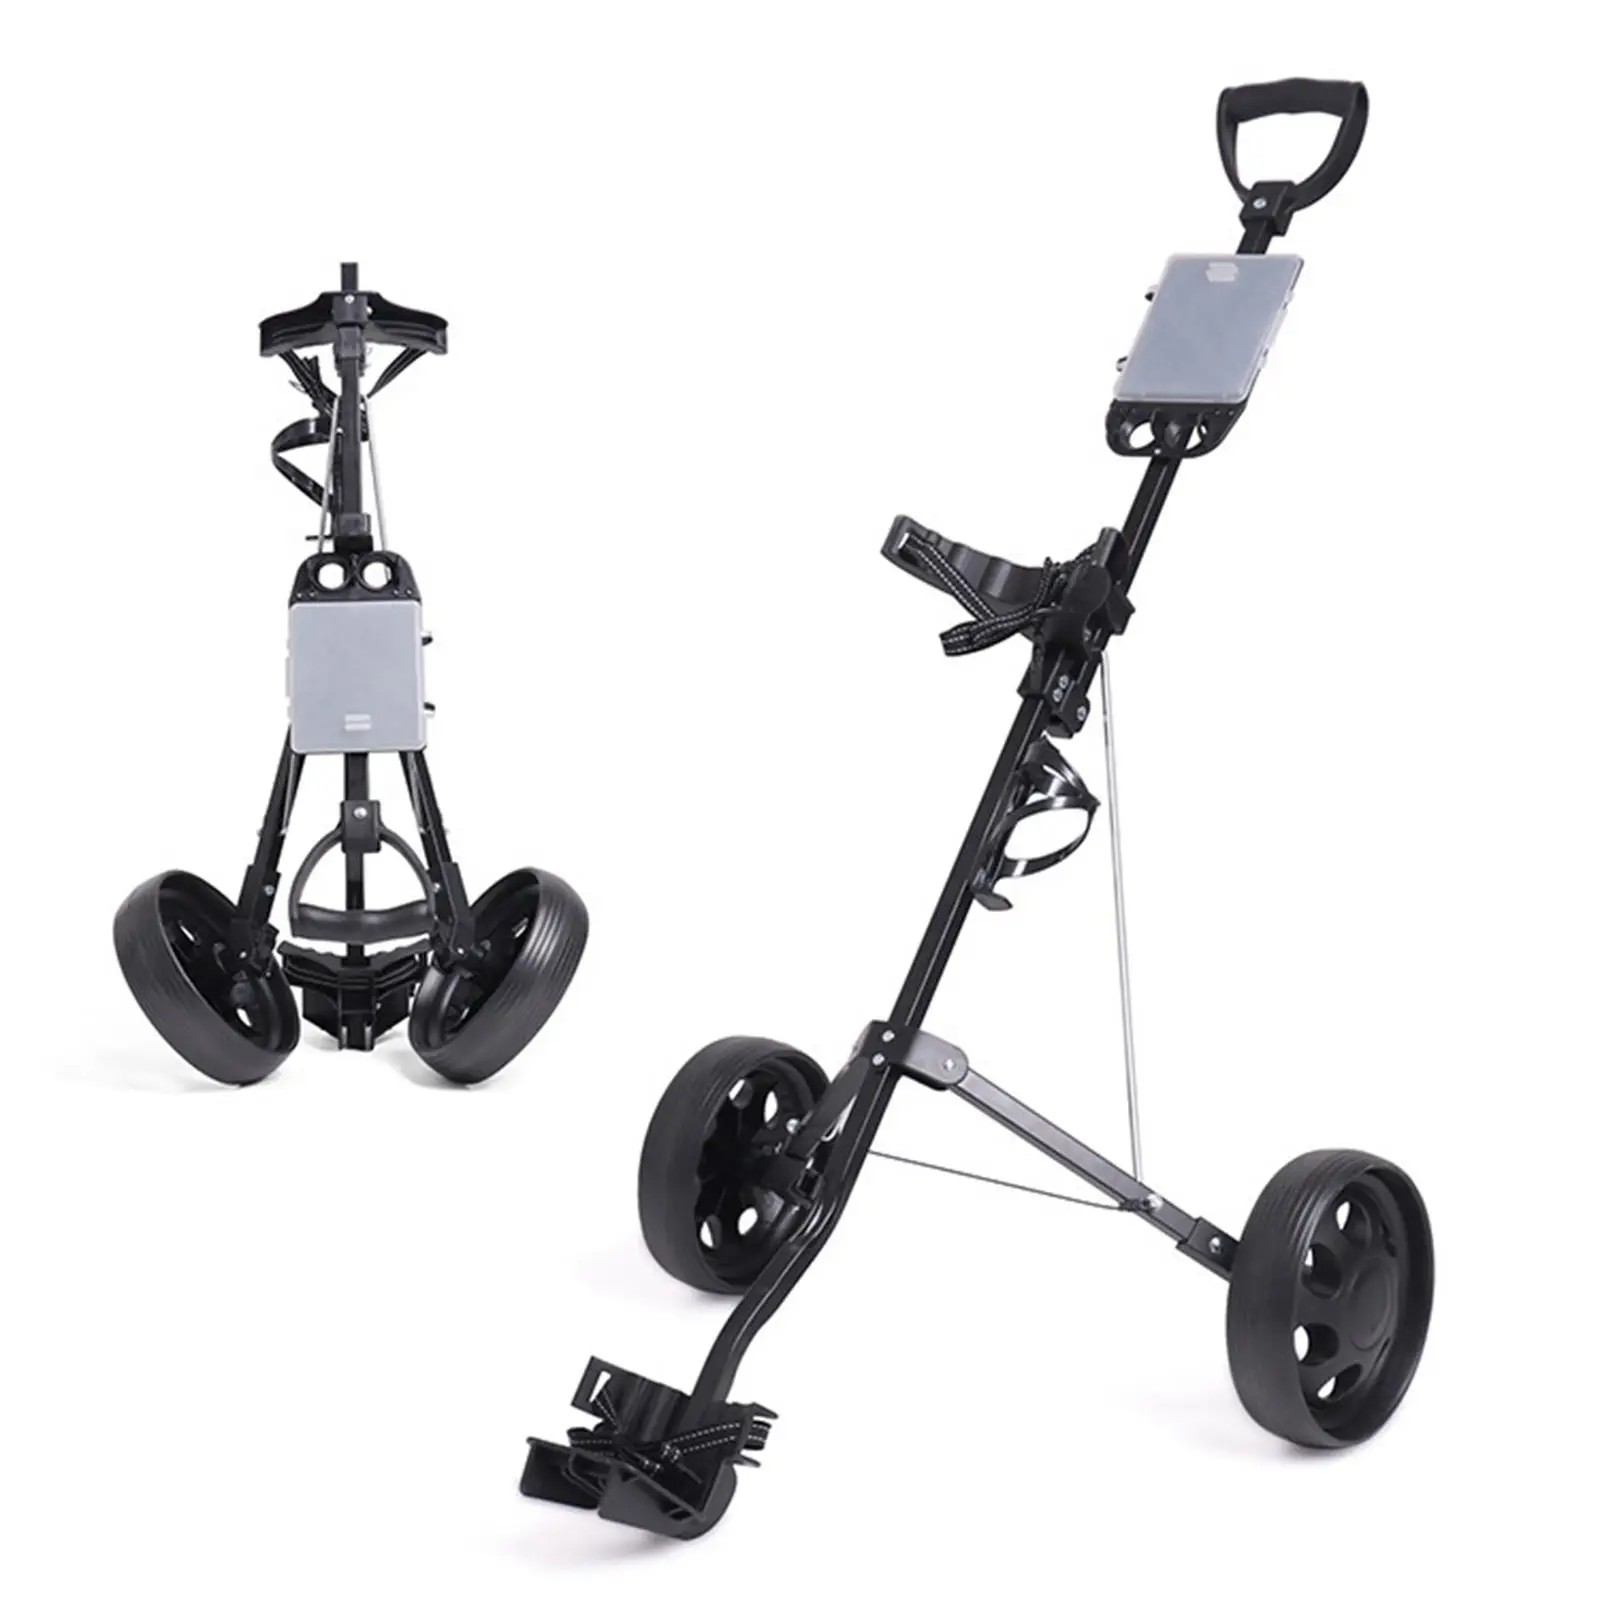 Folding Golf Pull Cart 2 Wheel Adjustable Handle Angle Collapsible Easy to Carry Folding Golf Push Cart for Golf Men Kids Women